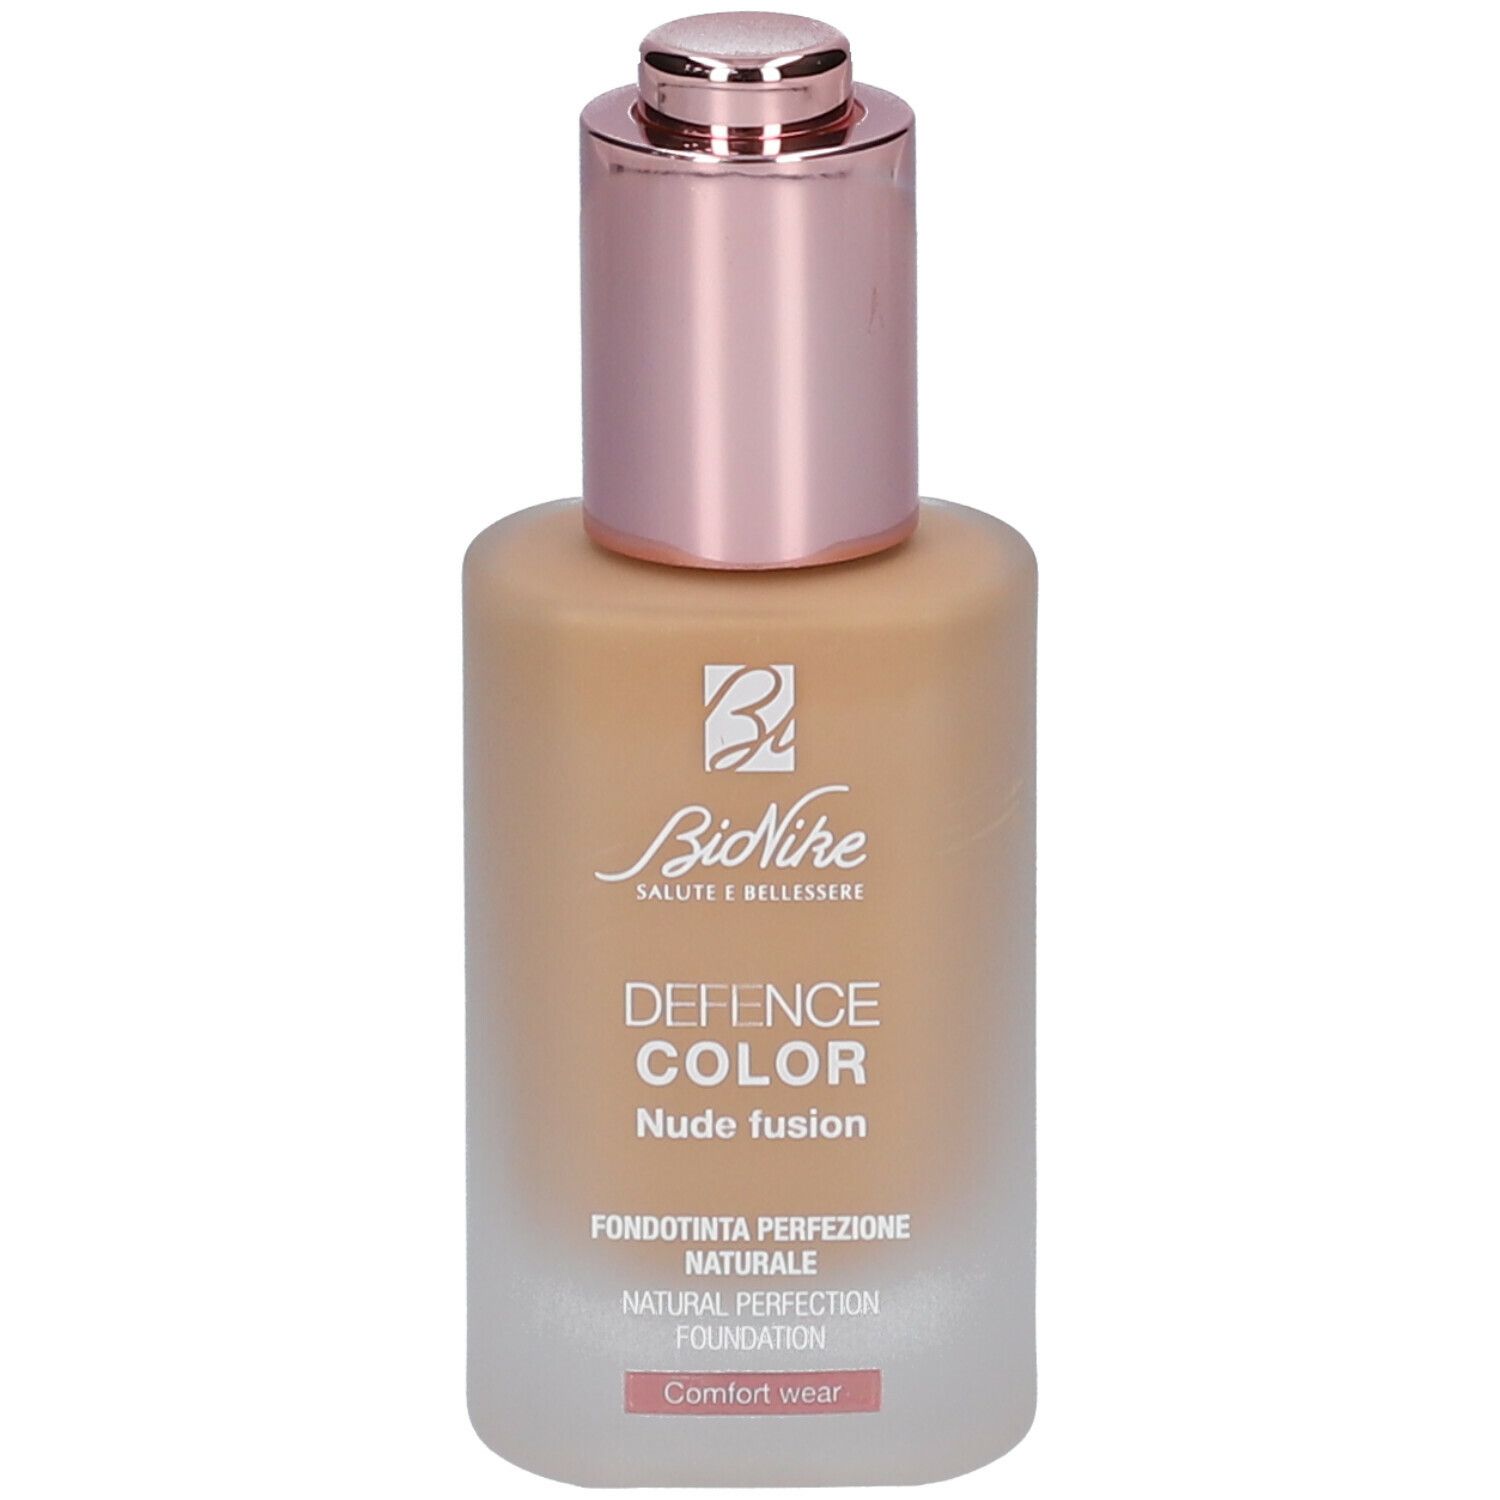 BioNike Defence Color Nude Fusion Natural Perfection Foundation 602 Noisette